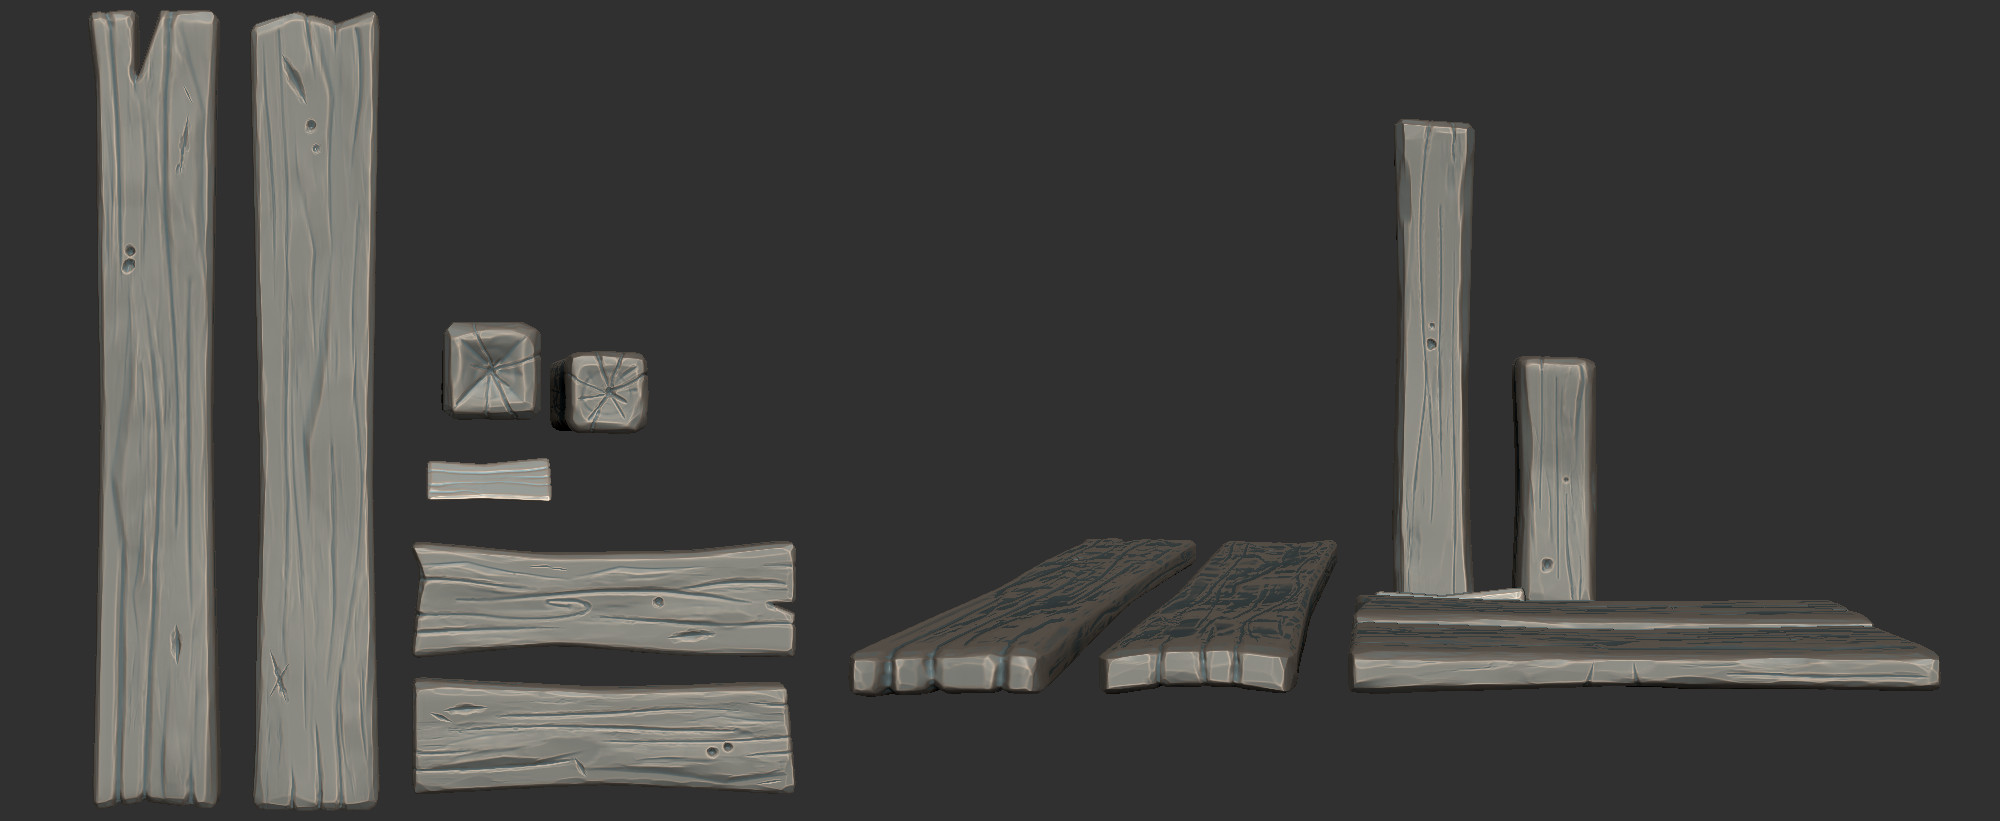 High poly wood sculpts, in Zbrush